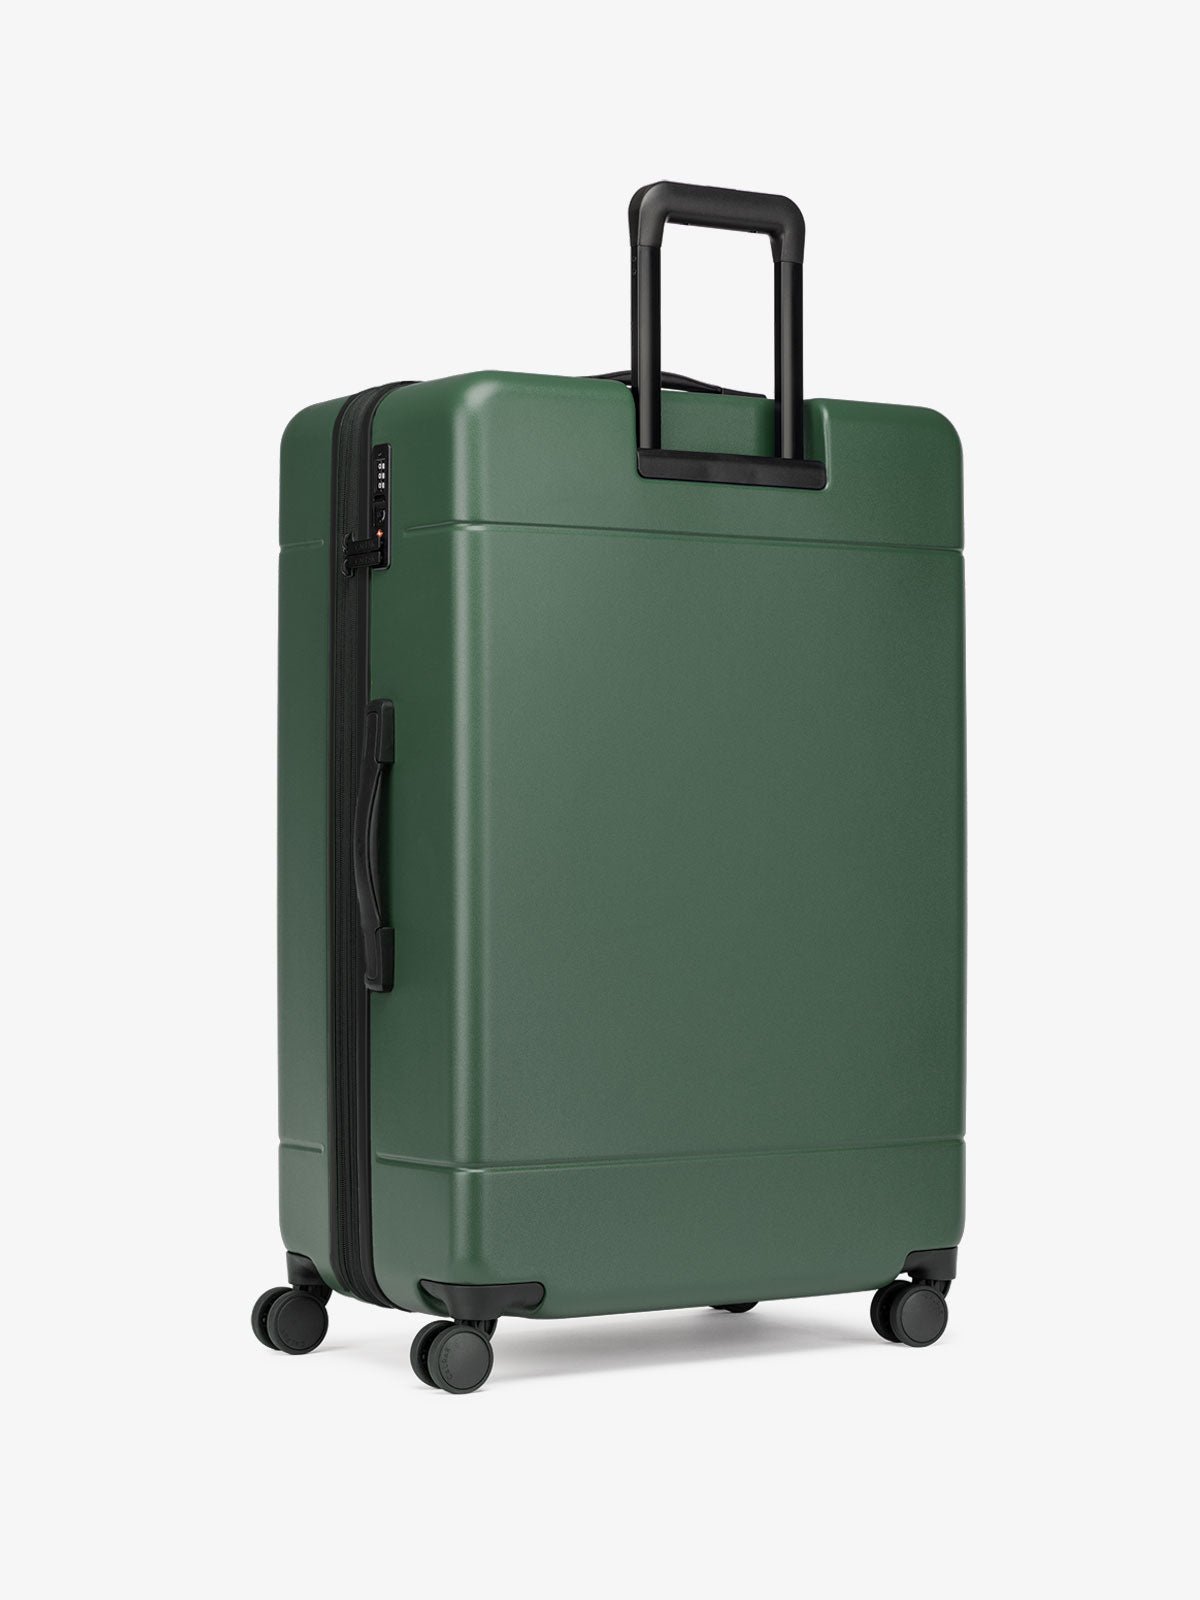 Hue large 28 inch durable hard shell polycarbonate luggage in green